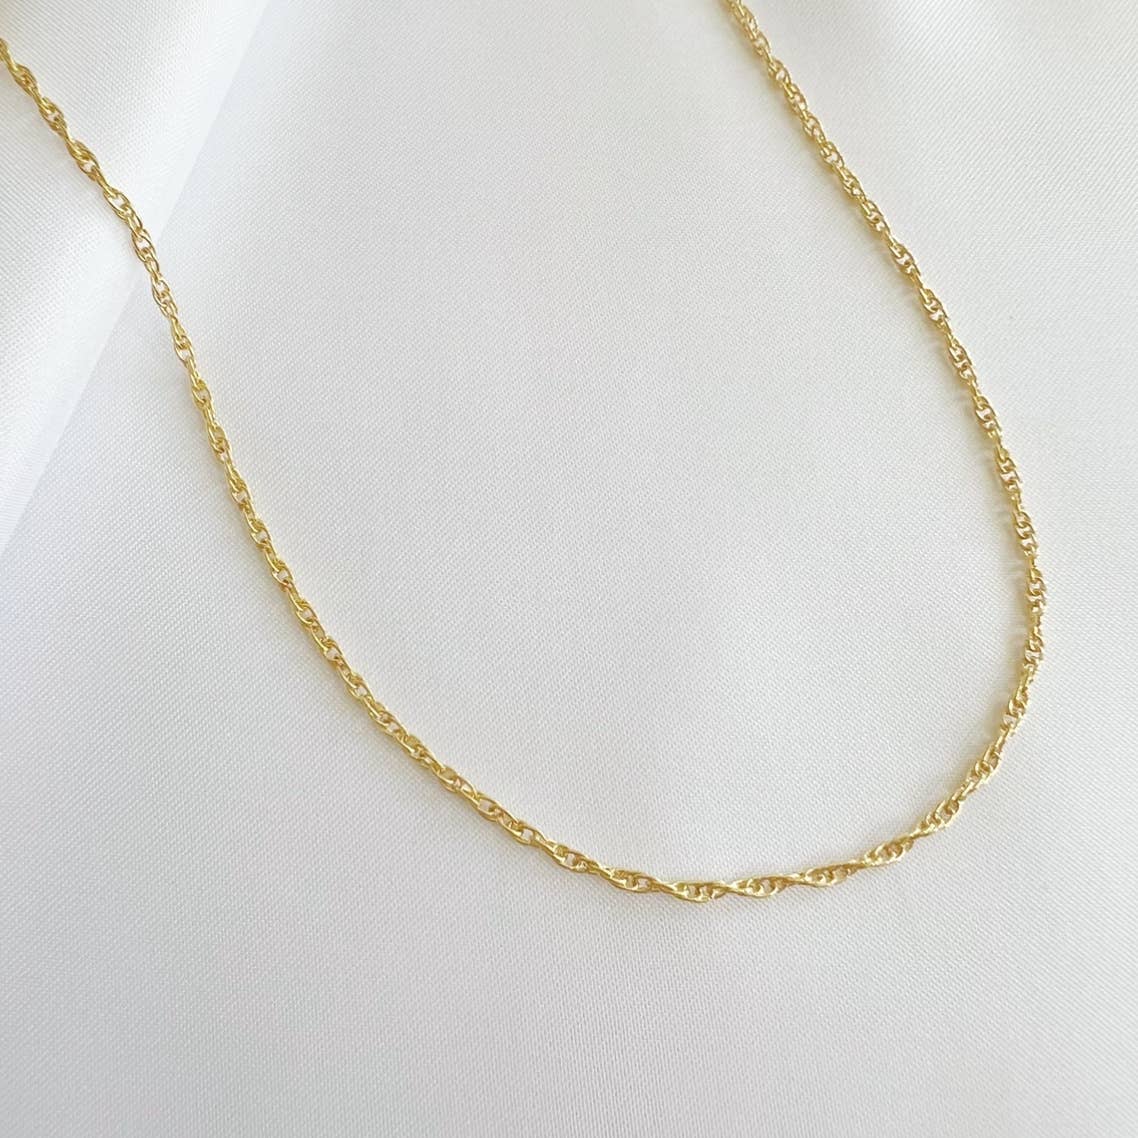 East Coast Rope Layering Chain Necklace Gold Filled: 16”